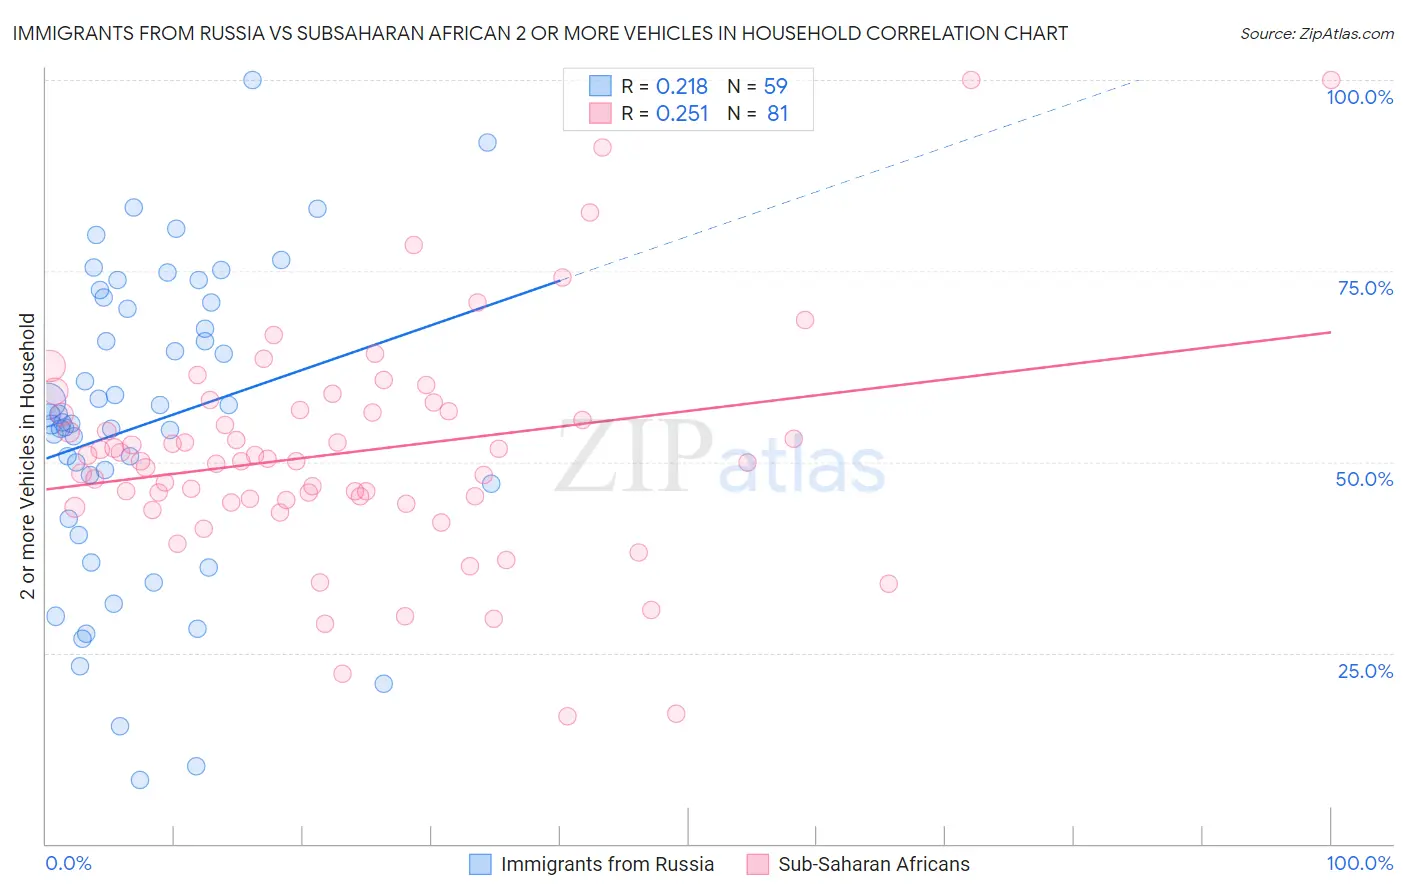 Immigrants from Russia vs Subsaharan African 2 or more Vehicles in Household